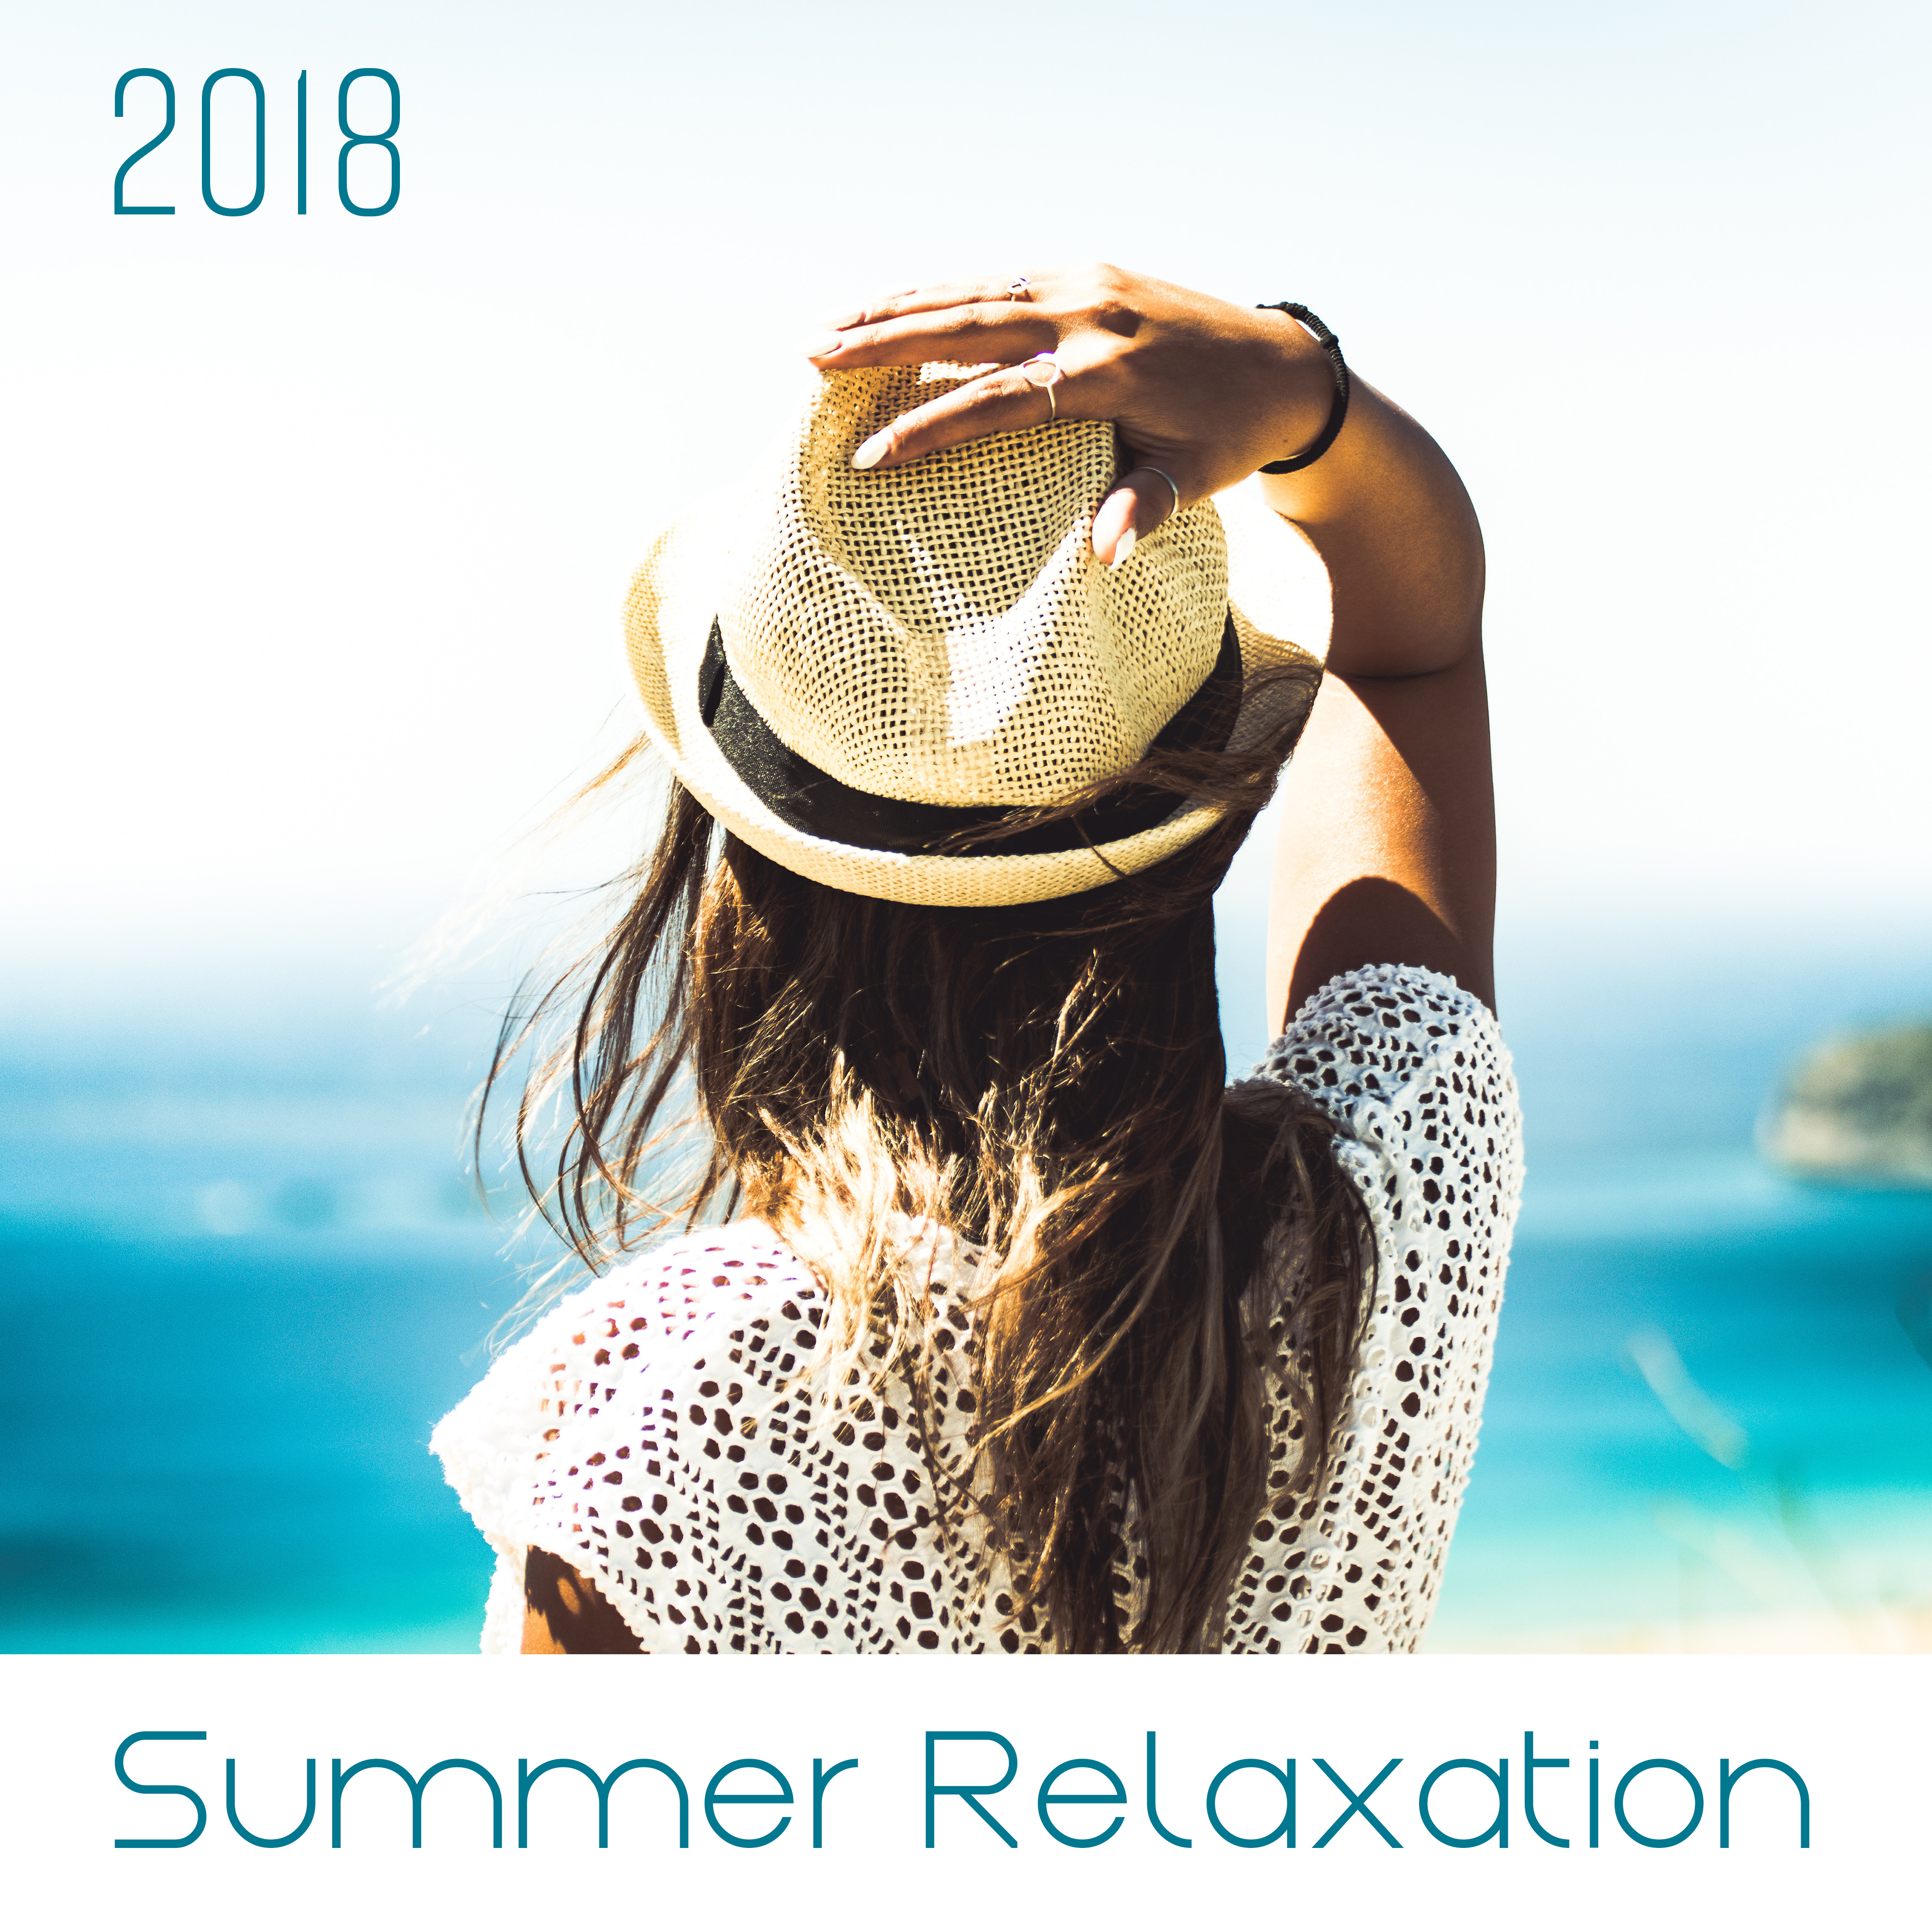 Summer Relaxation 2018